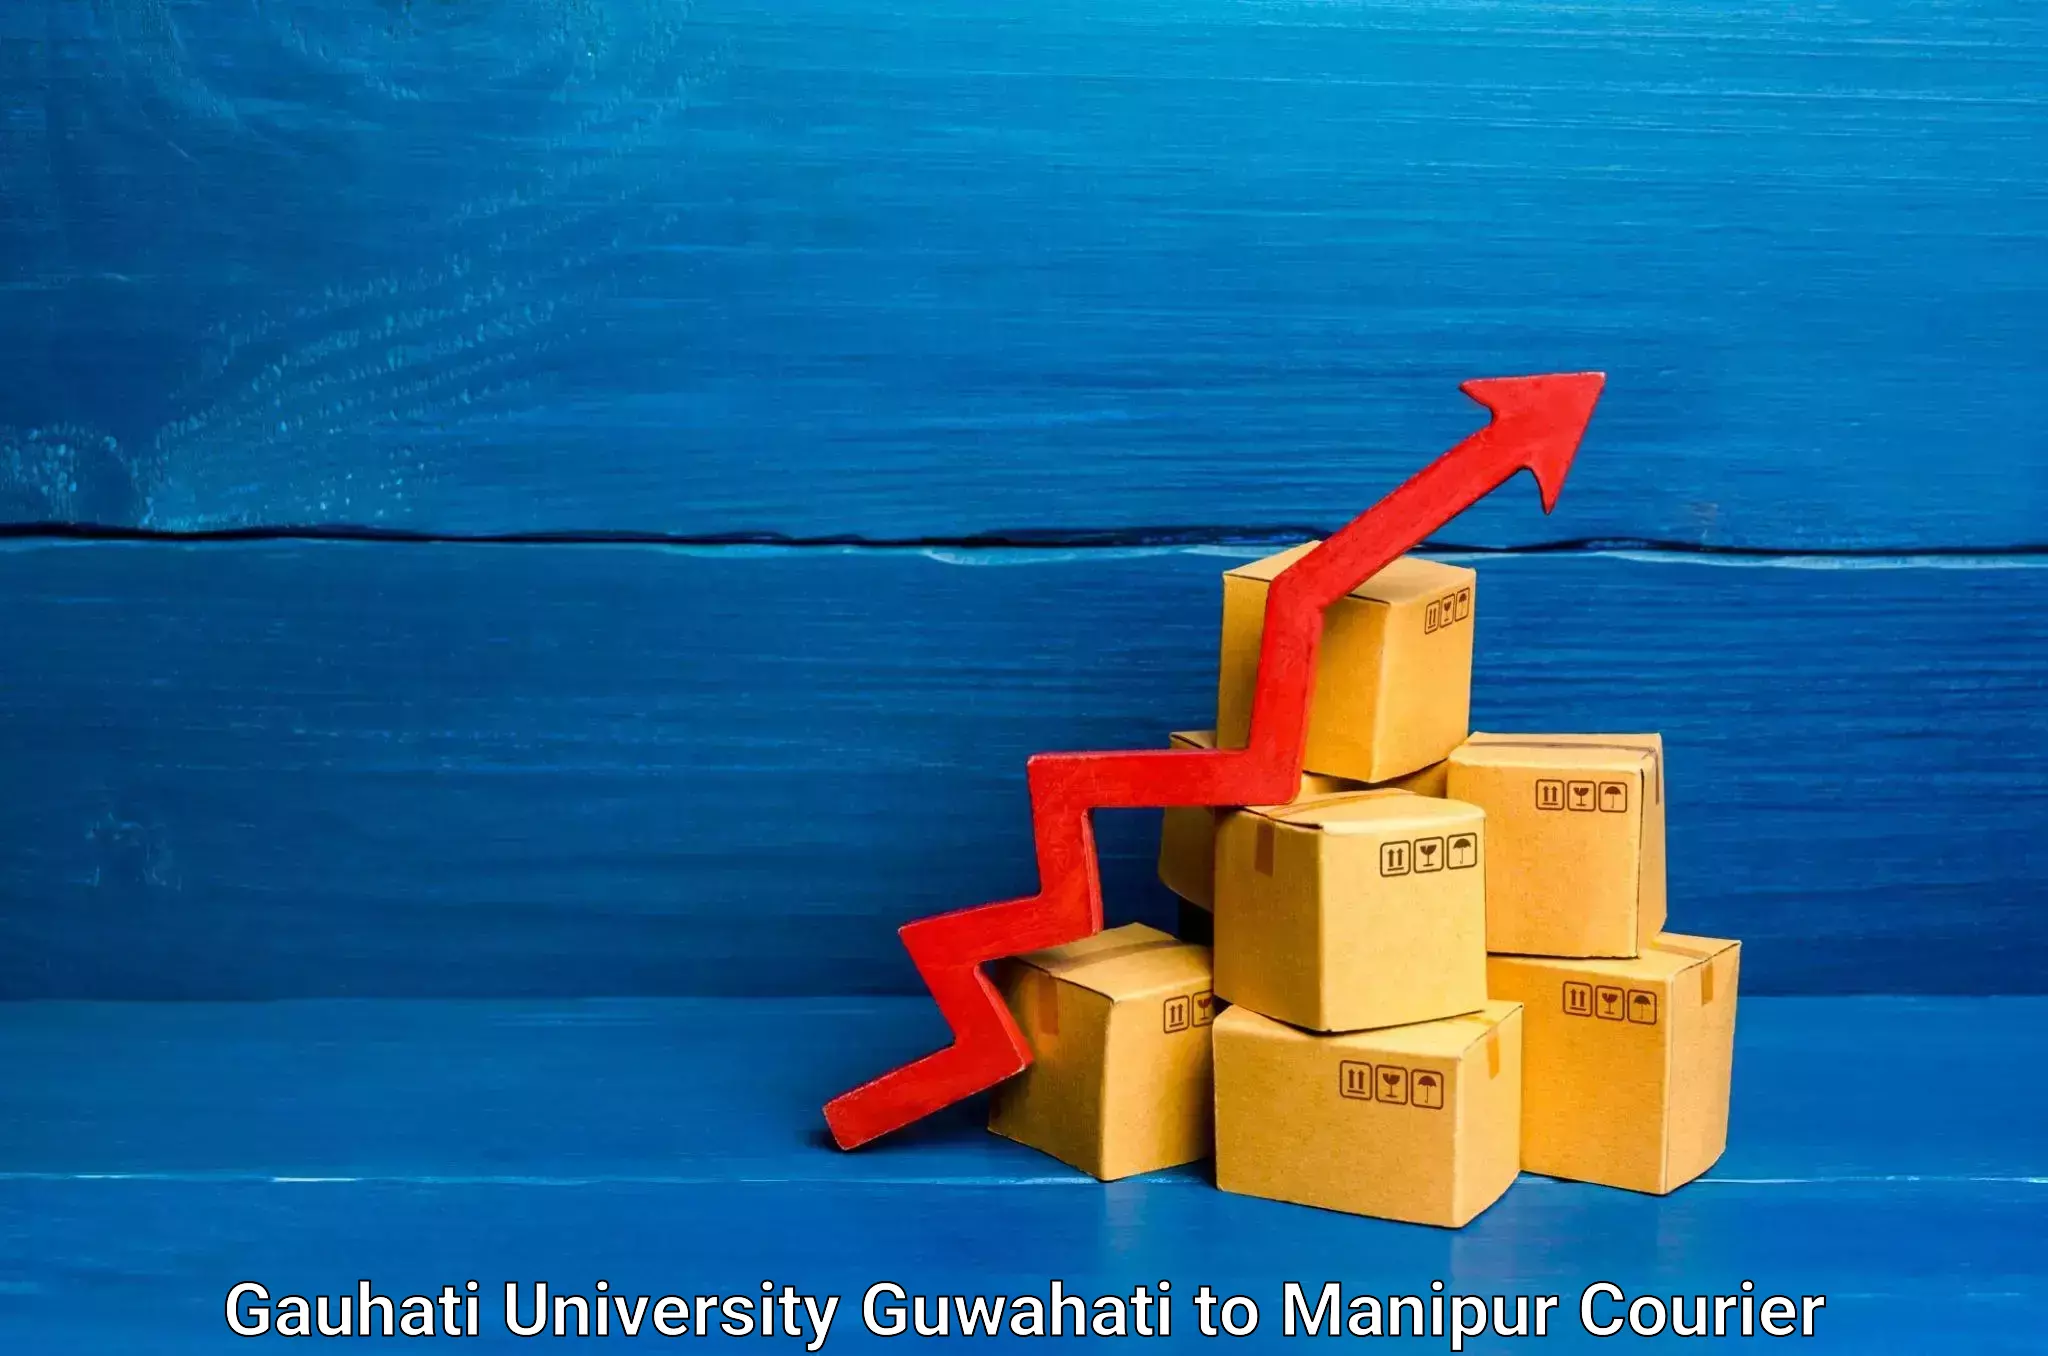 Scheduled delivery Gauhati University Guwahati to Imphal